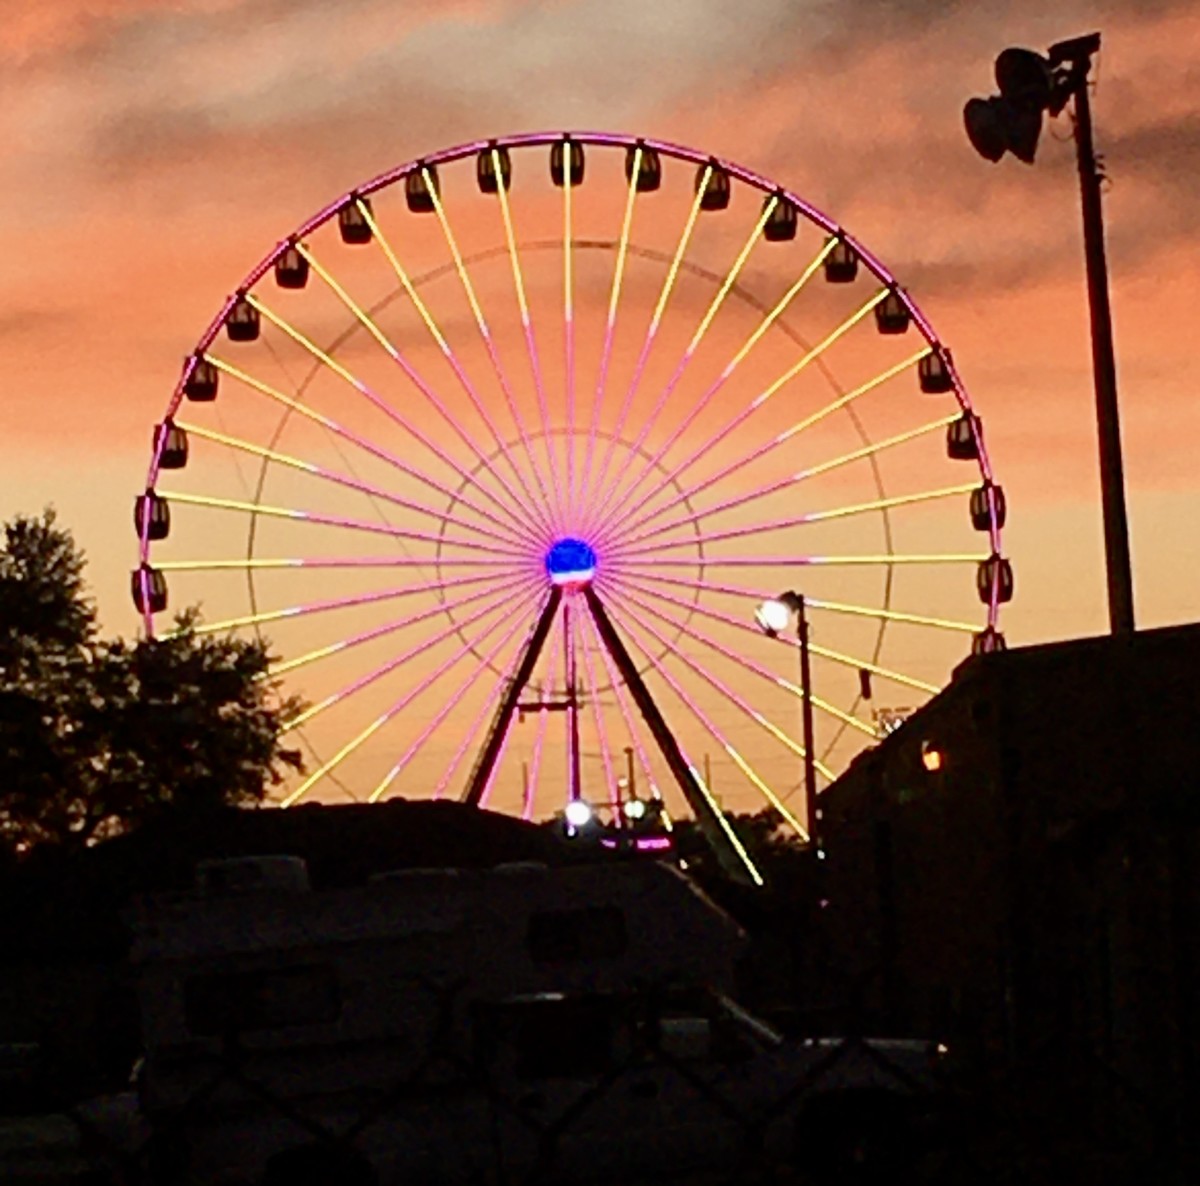 Sunset at the County Fair, 2019